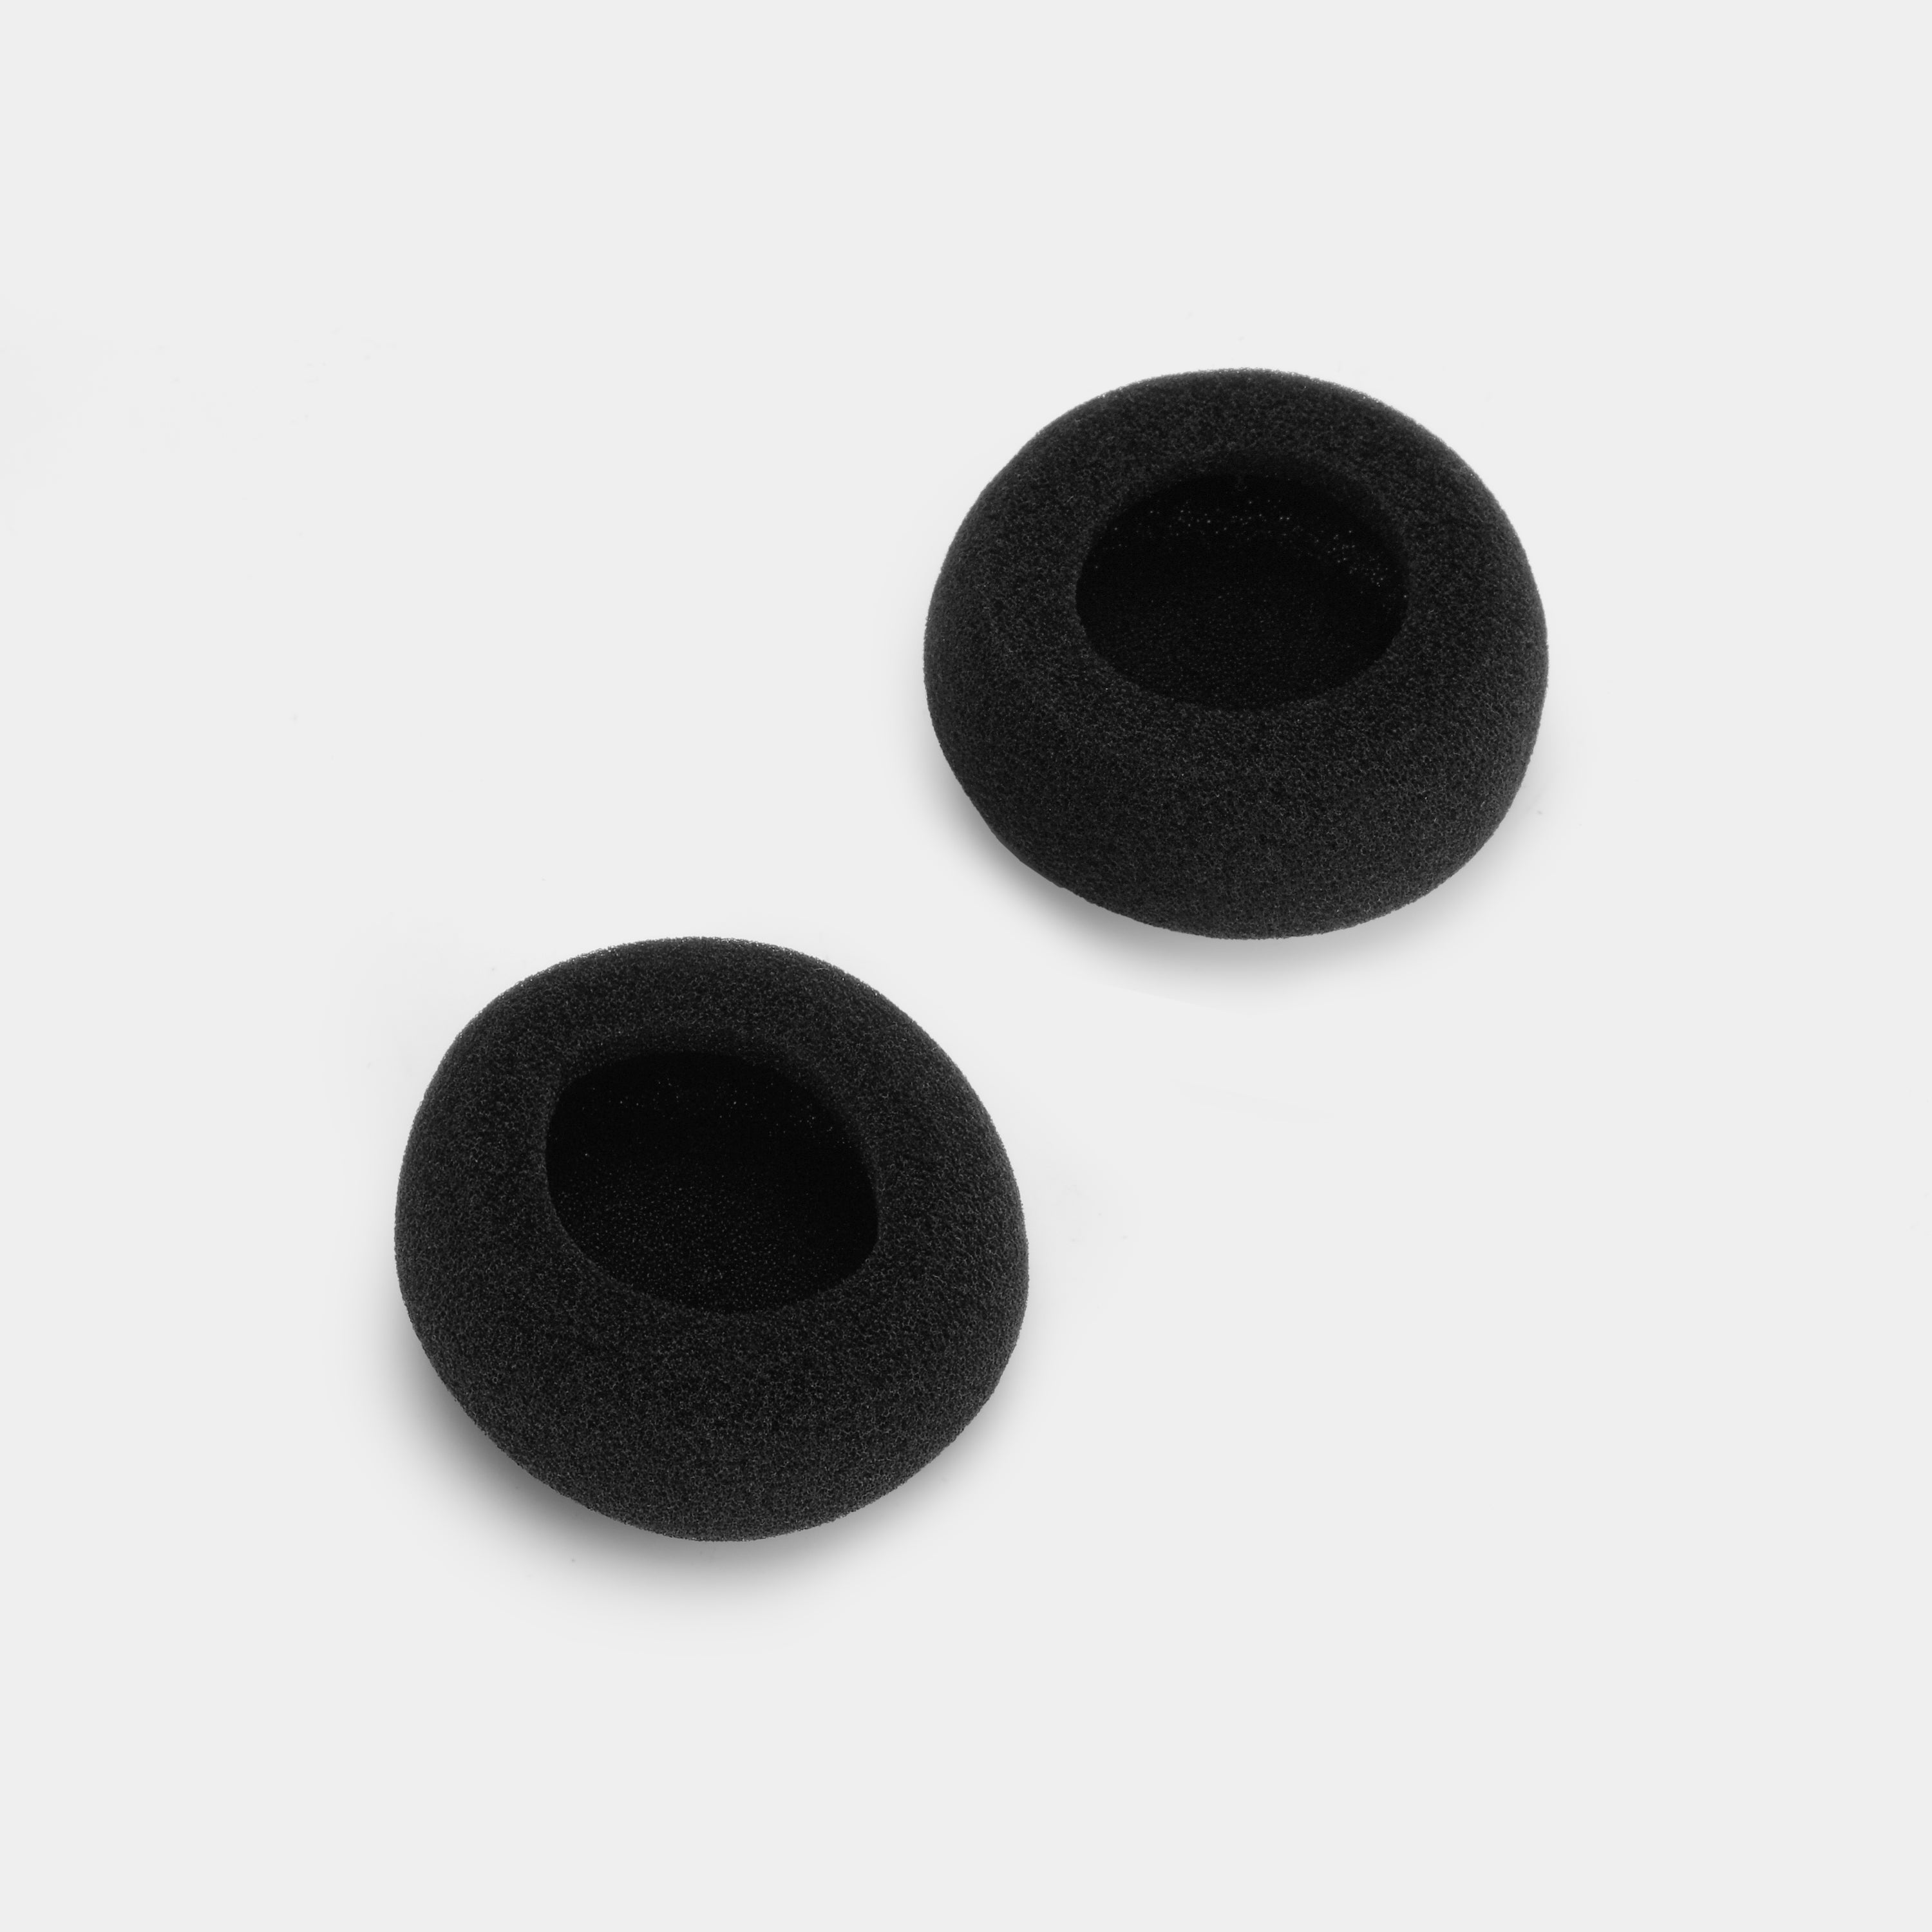 Thick Replacement Foam Pad Cushions for Headphones - 2" Diameter